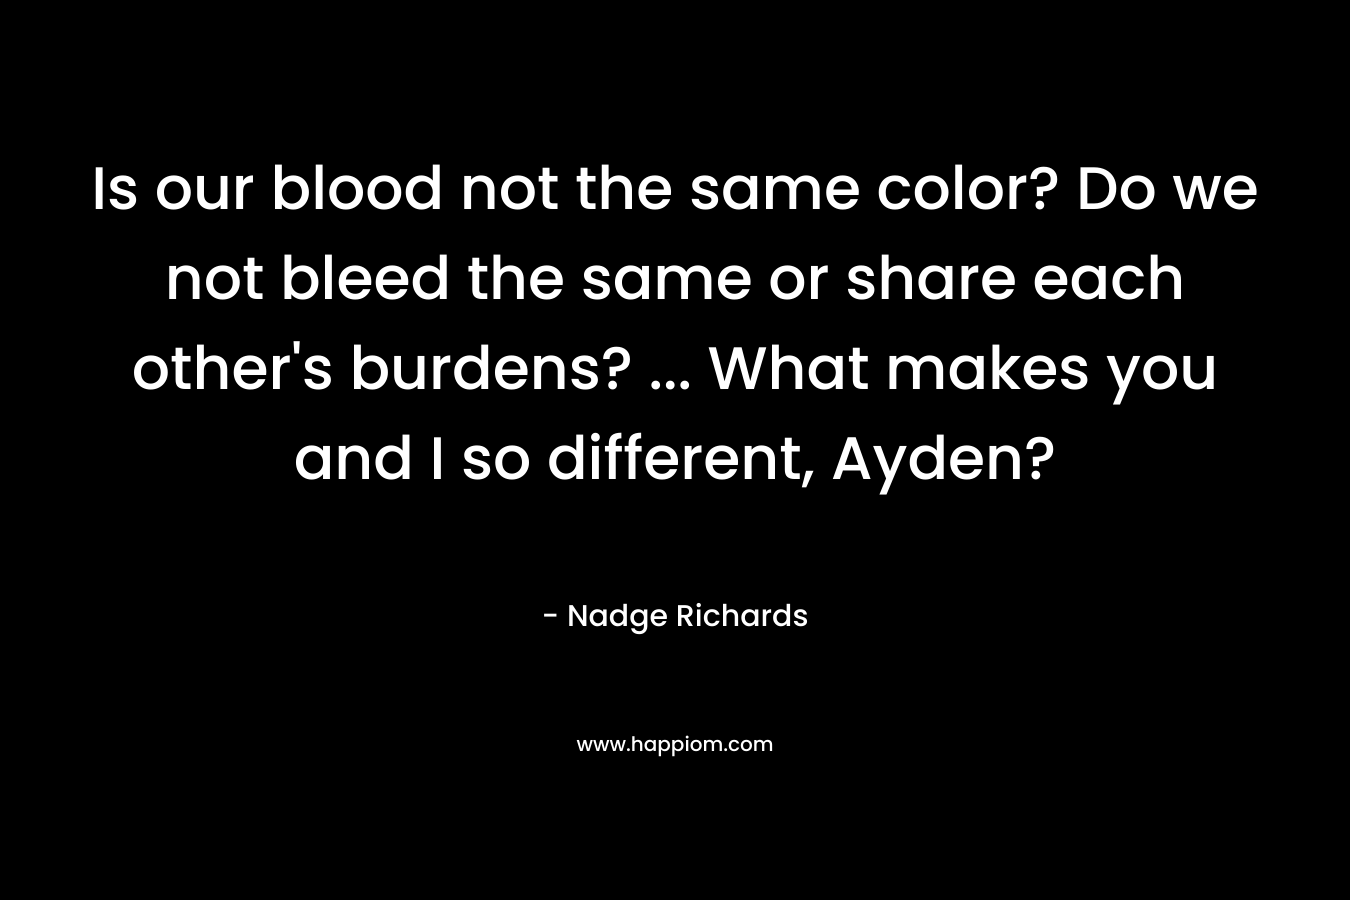 Is our blood not the same color? Do we not bleed the same or share each other's burdens? ... What makes you and I so different, Ayden?